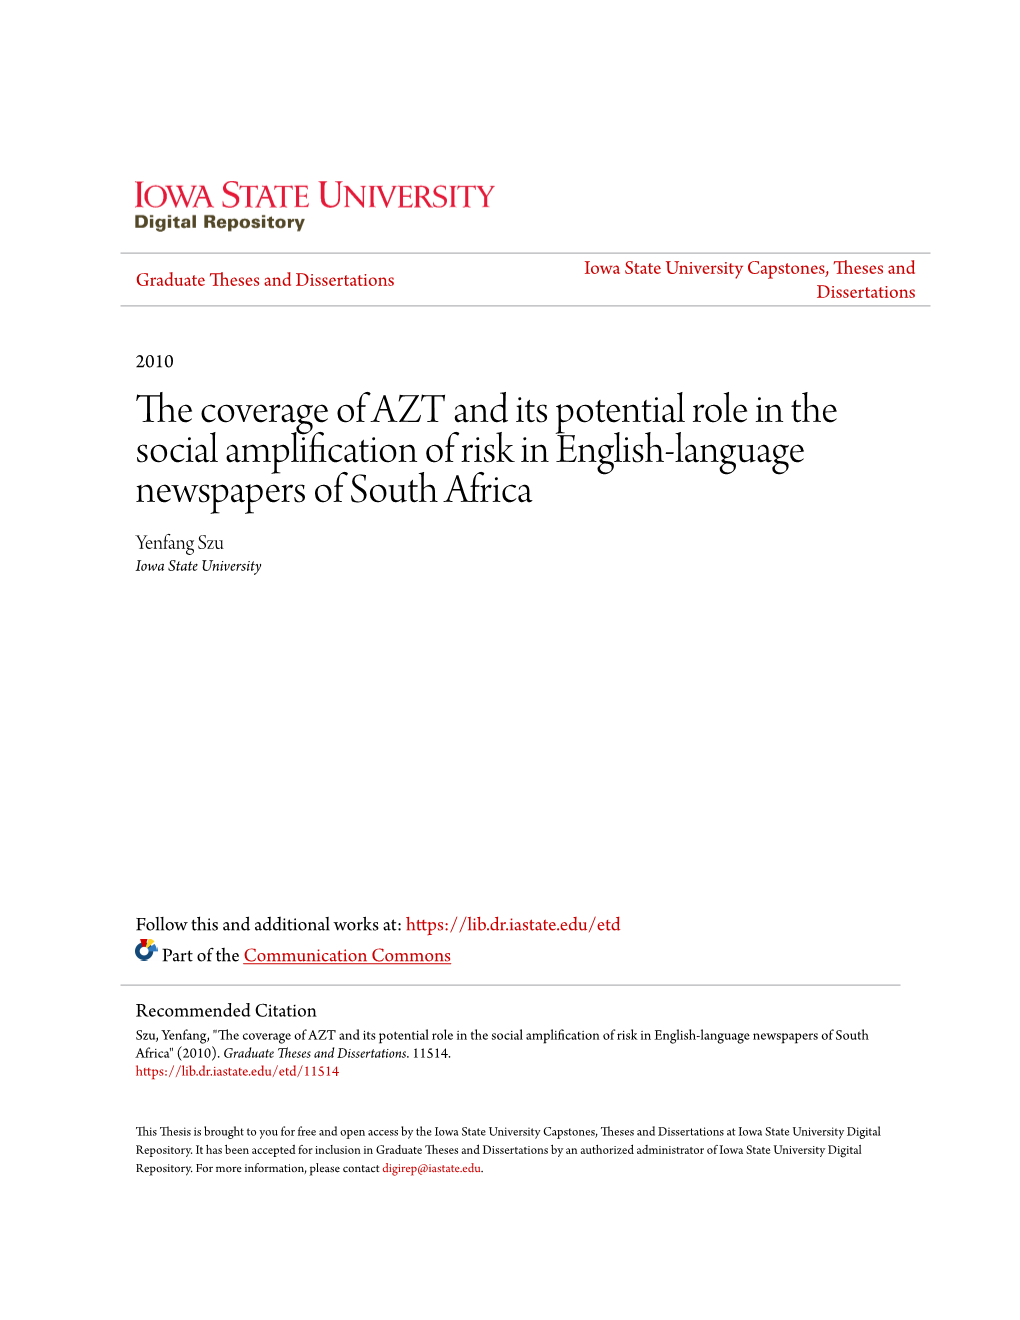 The Coverage of AZT and Its Potential Role in the Social Amplification of Risk in English-Language Newspapers of South Africa Yenfang Szu Iowa State University